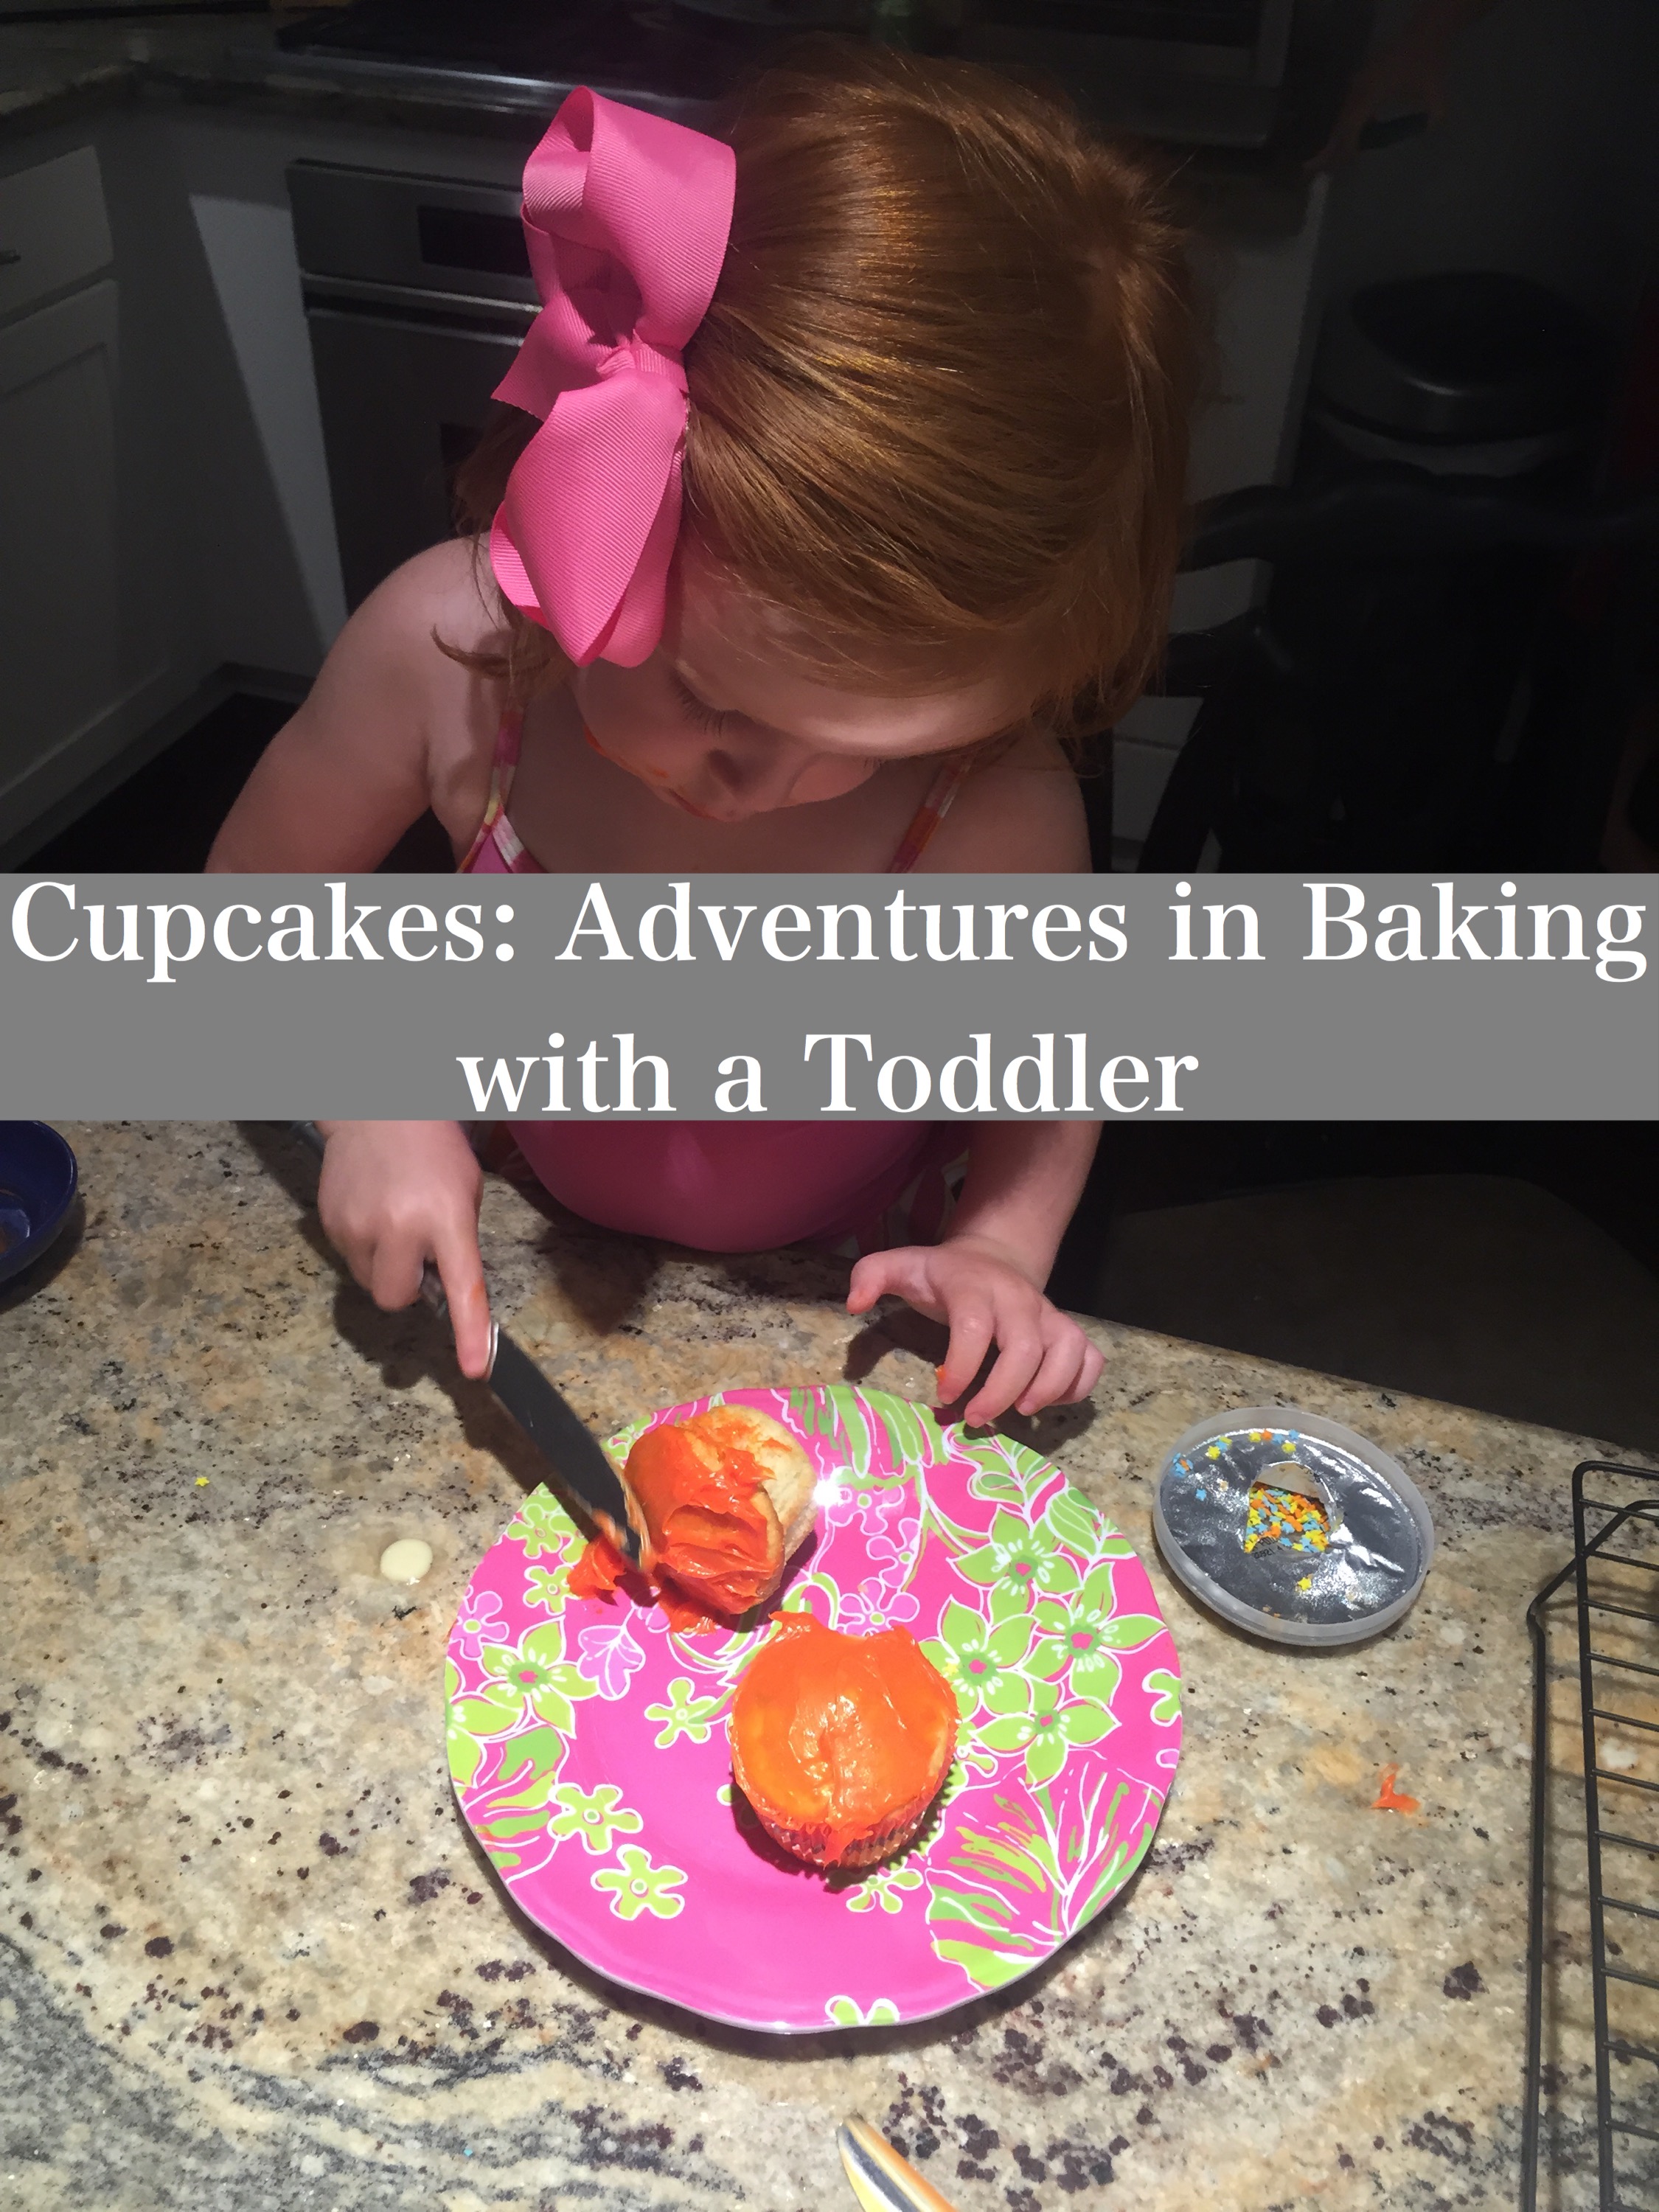 Cupcakes Adventures in Baking with a Toddler by Happy Family Blog